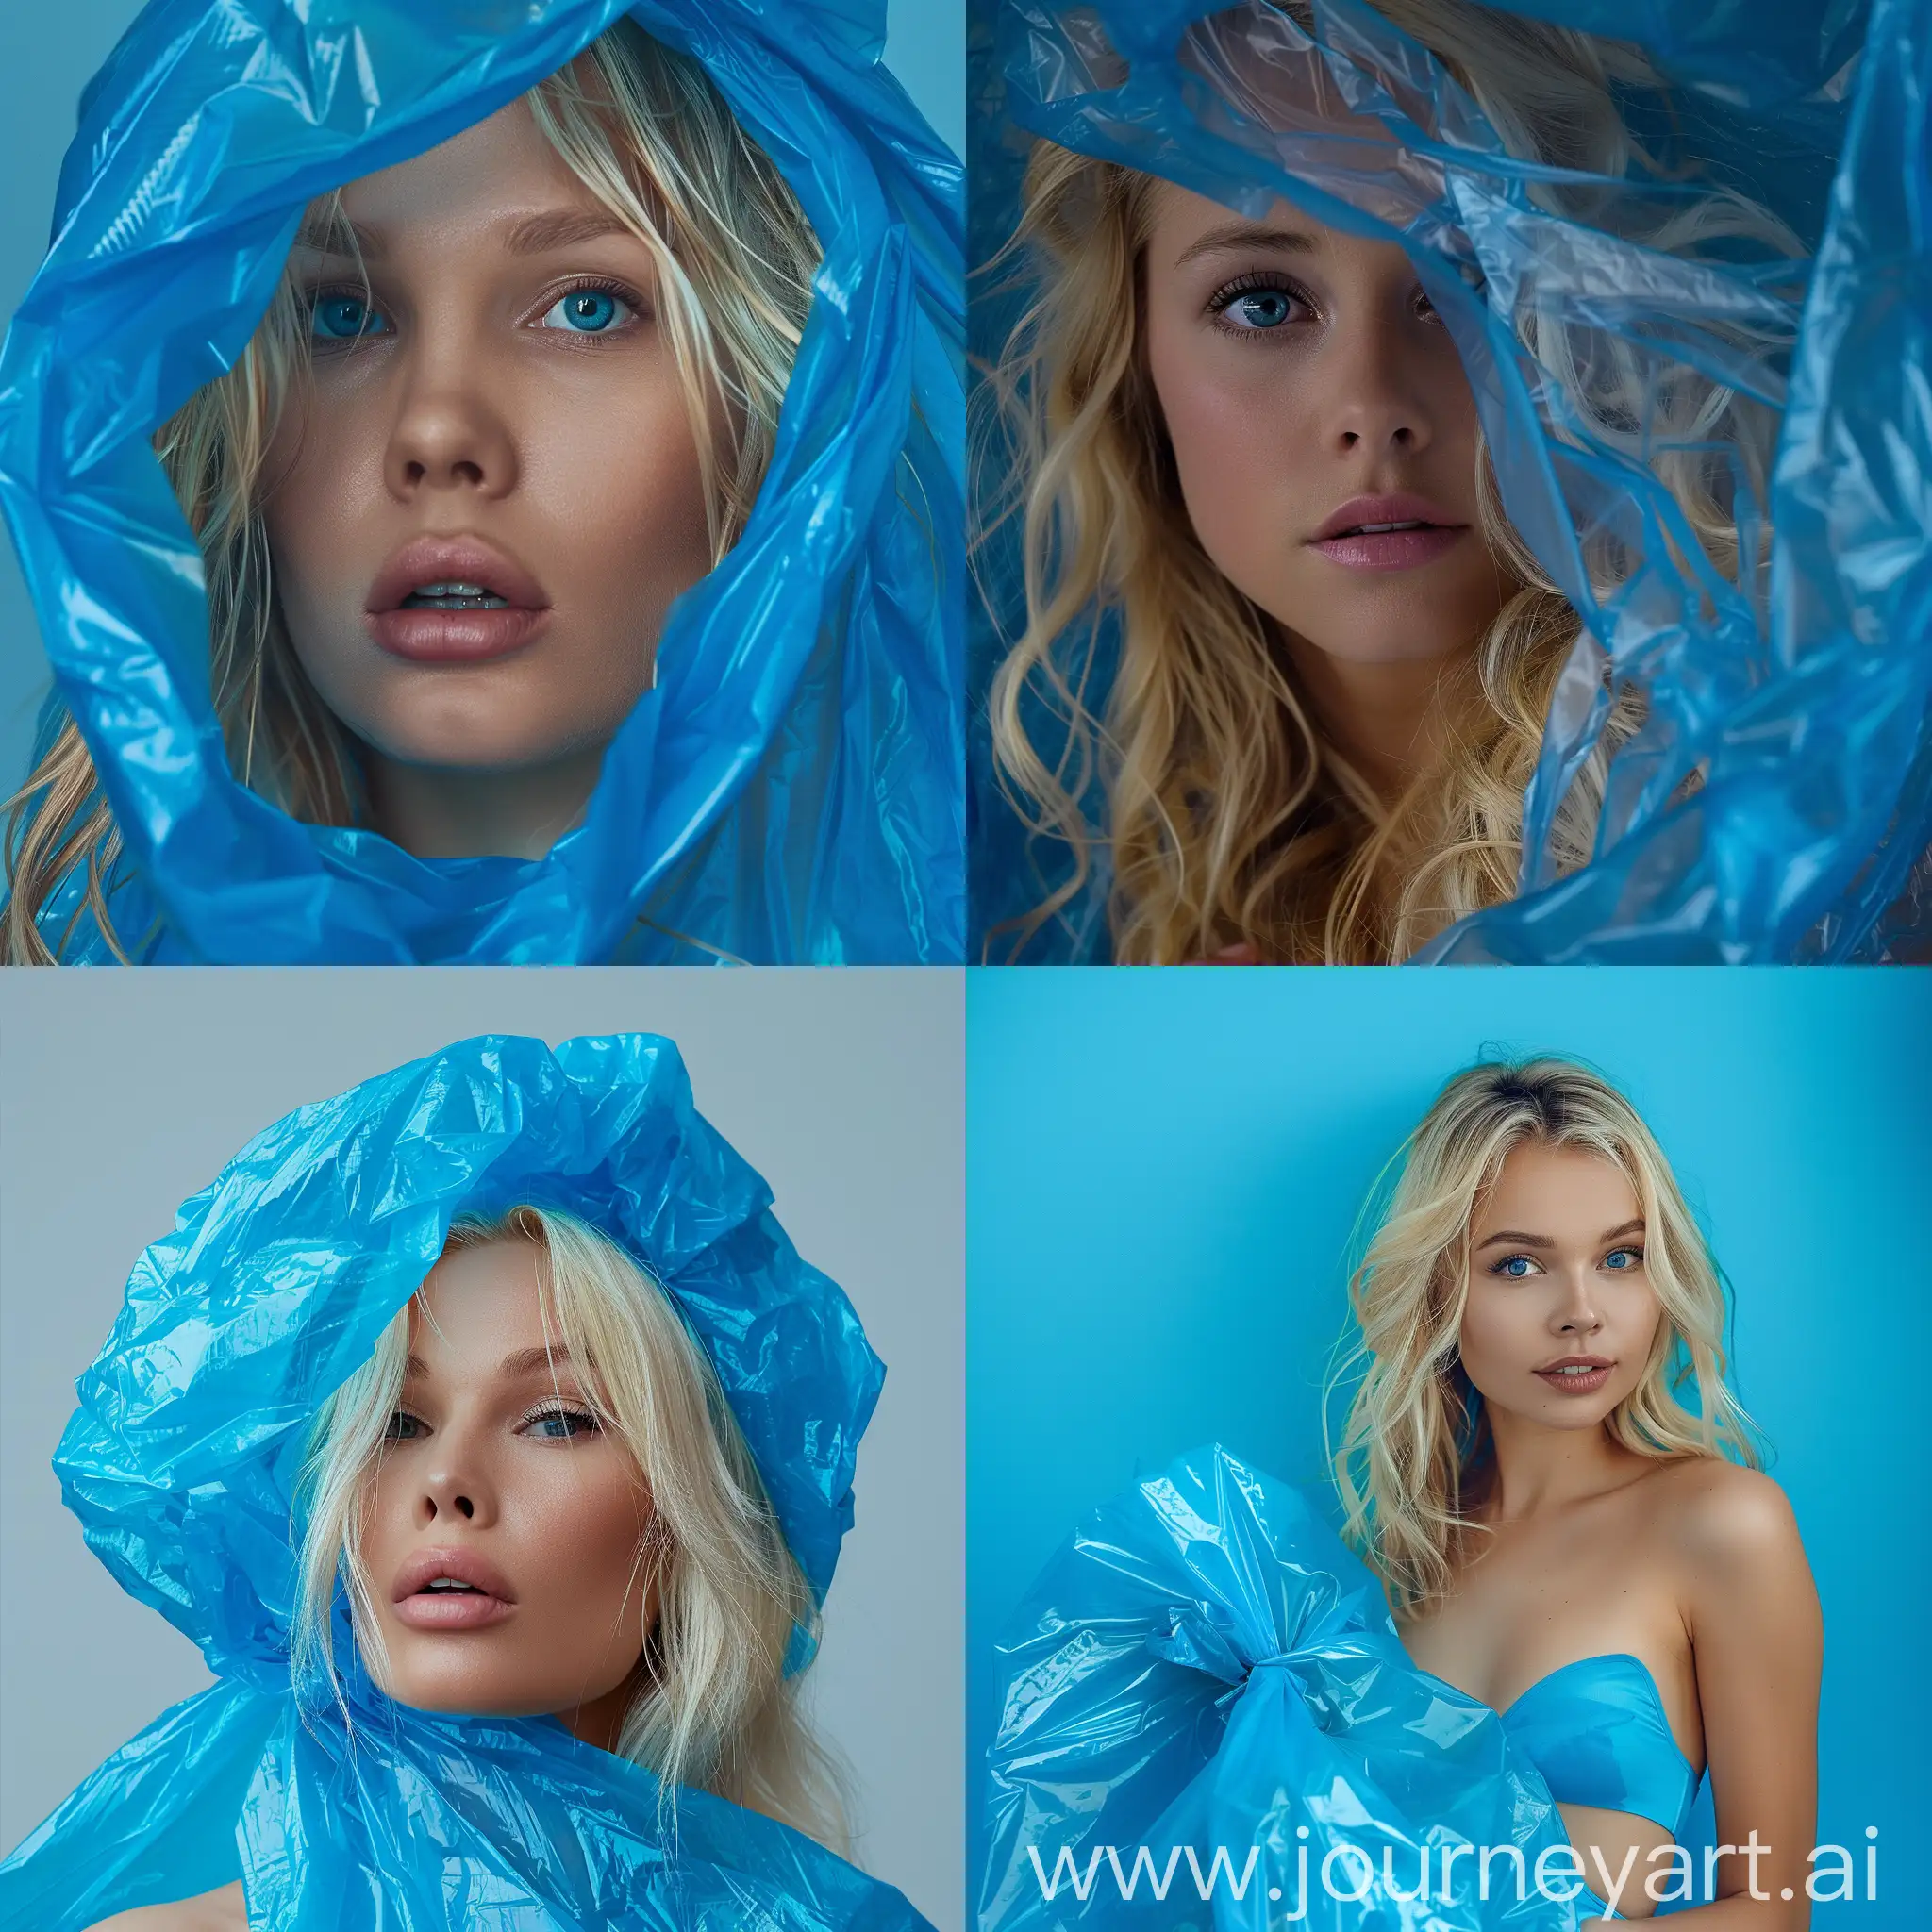 a stunningly beautiful blond woman wearing a blue plastic garbage bag